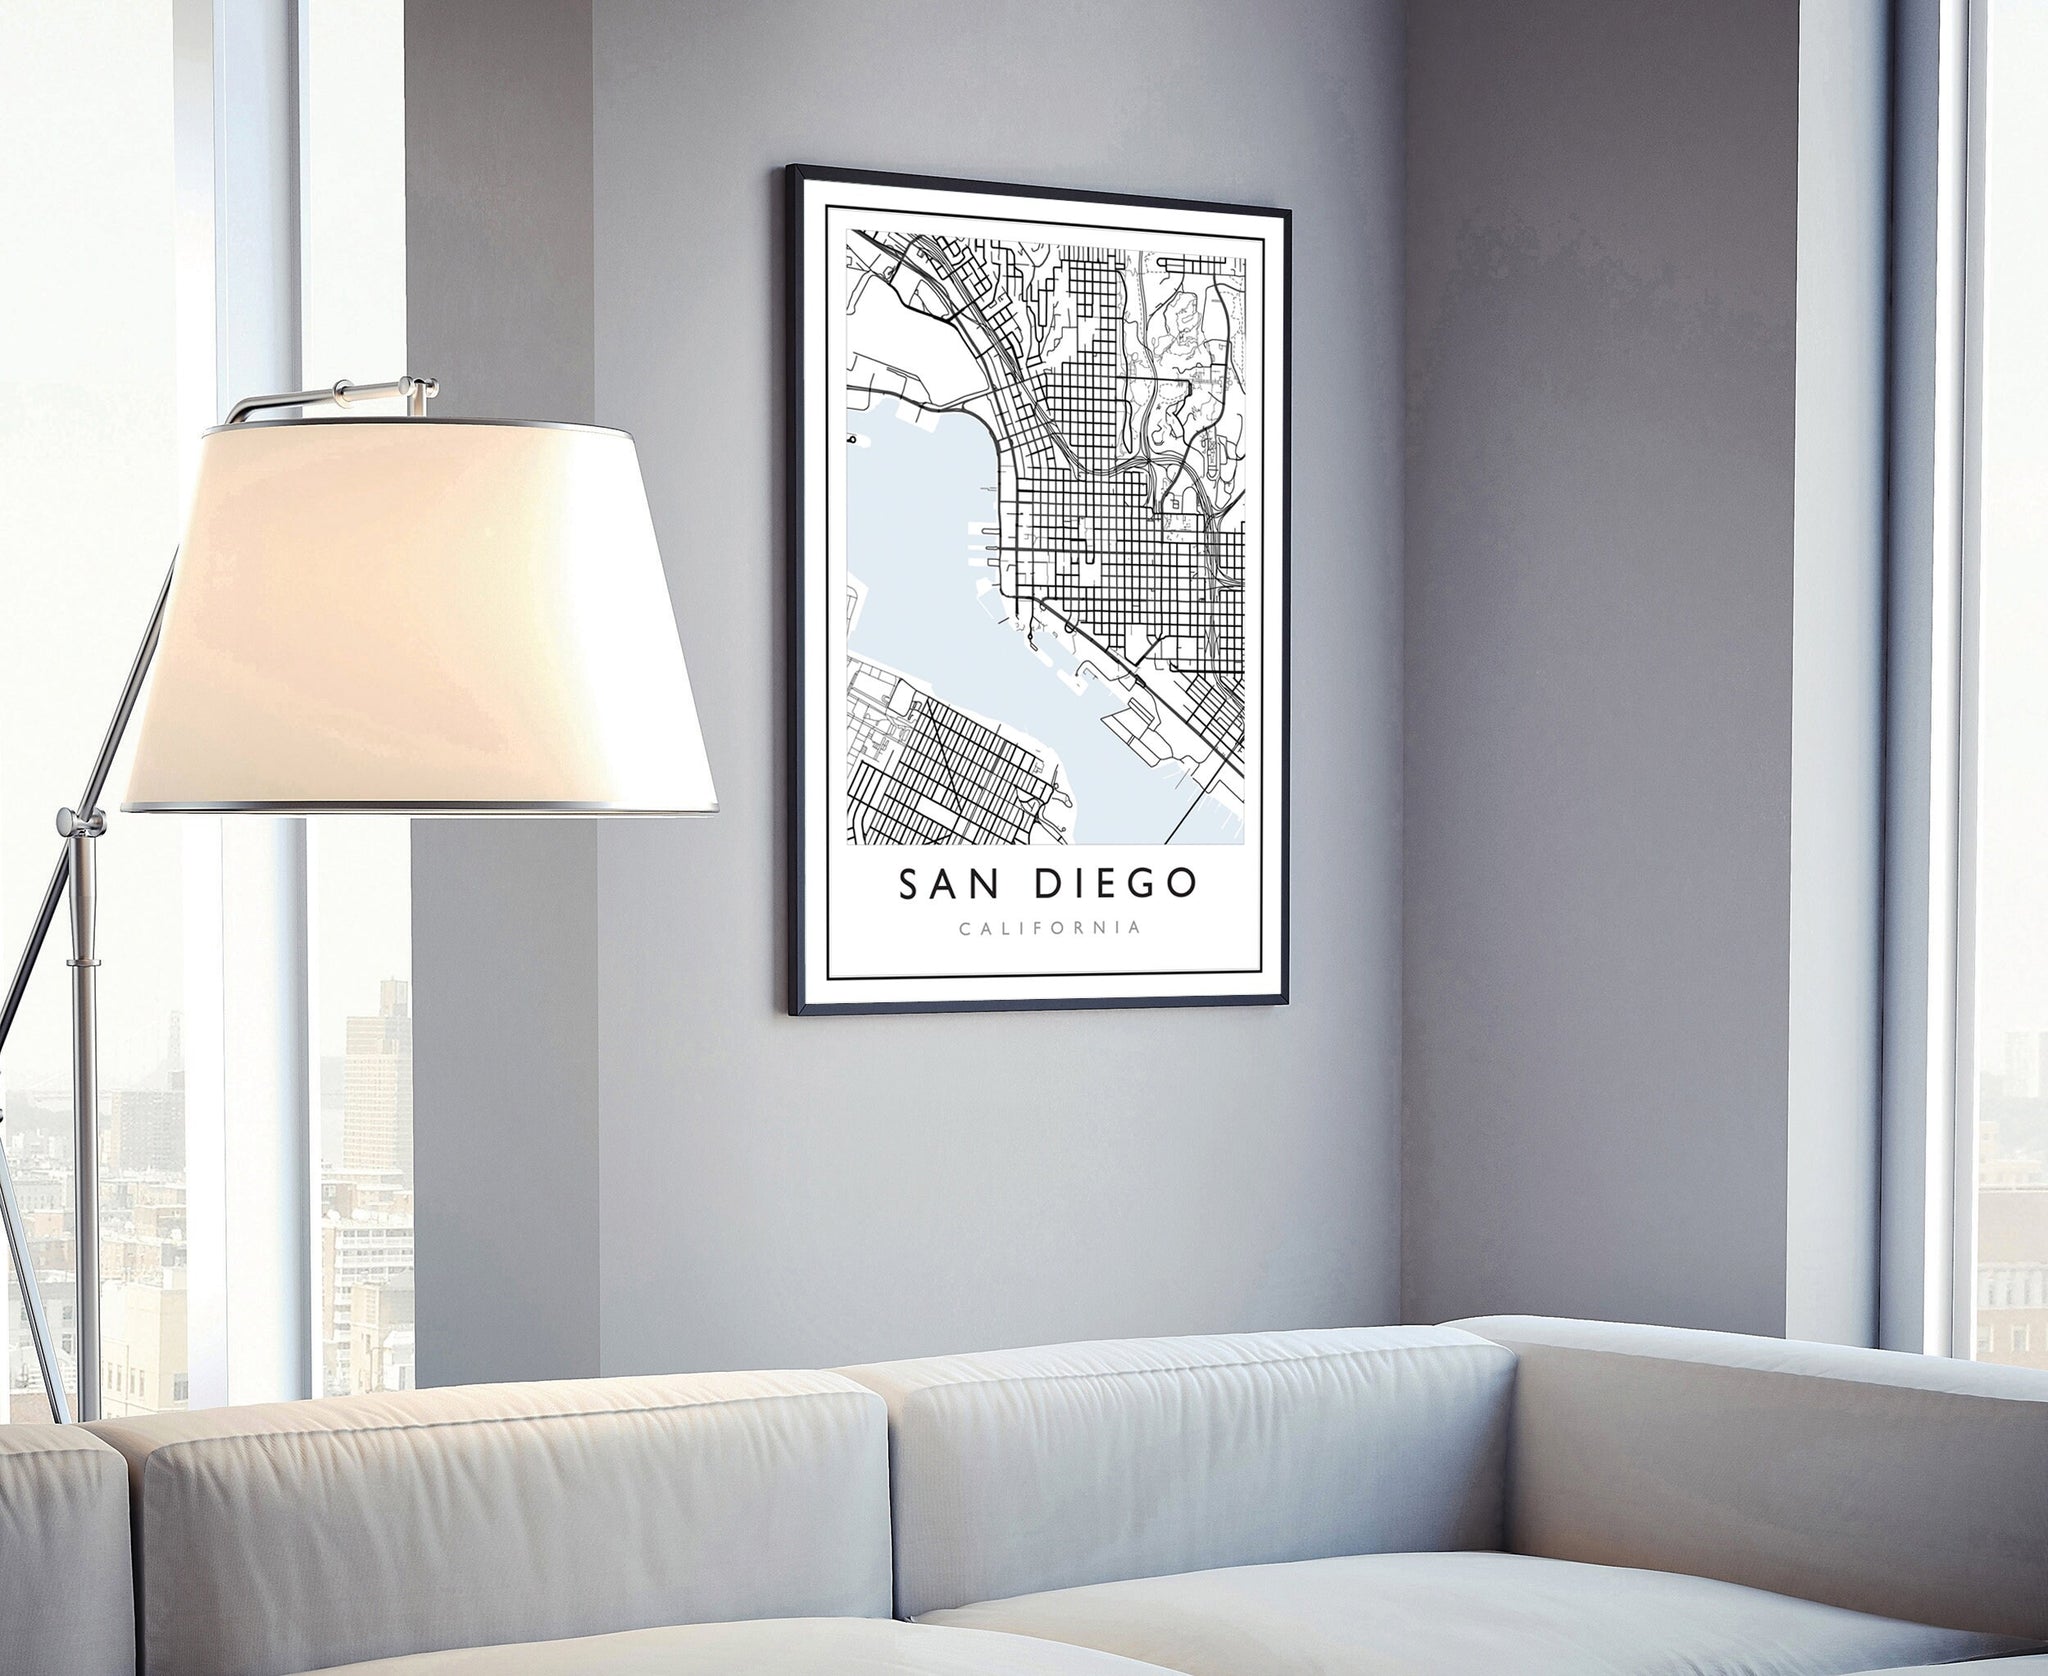 San Diego California City Map, San Diego Road Map Poster, City Street Map Print, US City Modern City Map, Home Office Wall Art Decoration